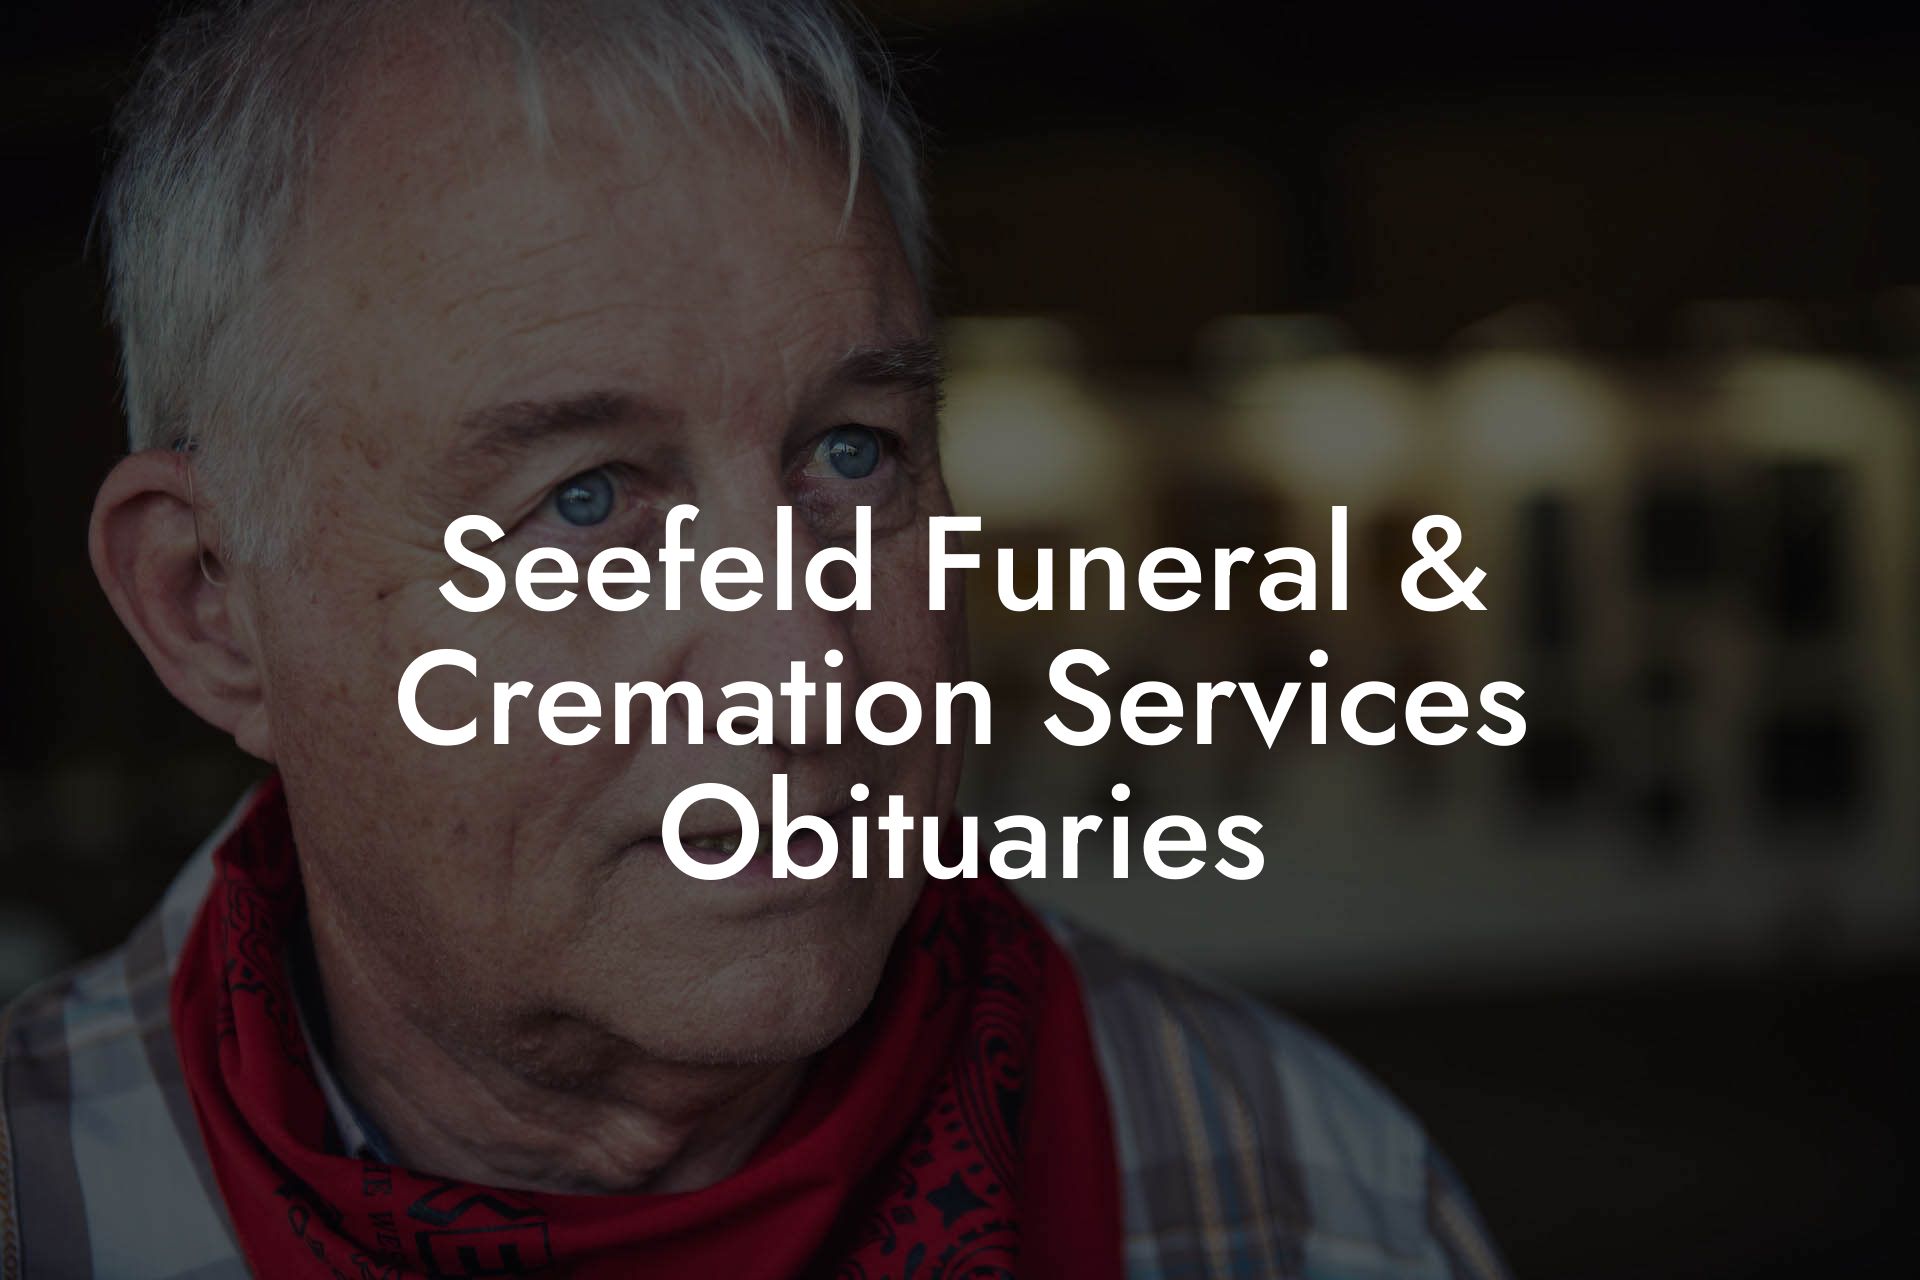 Seefeld Funeral & Cremation Services Obituaries